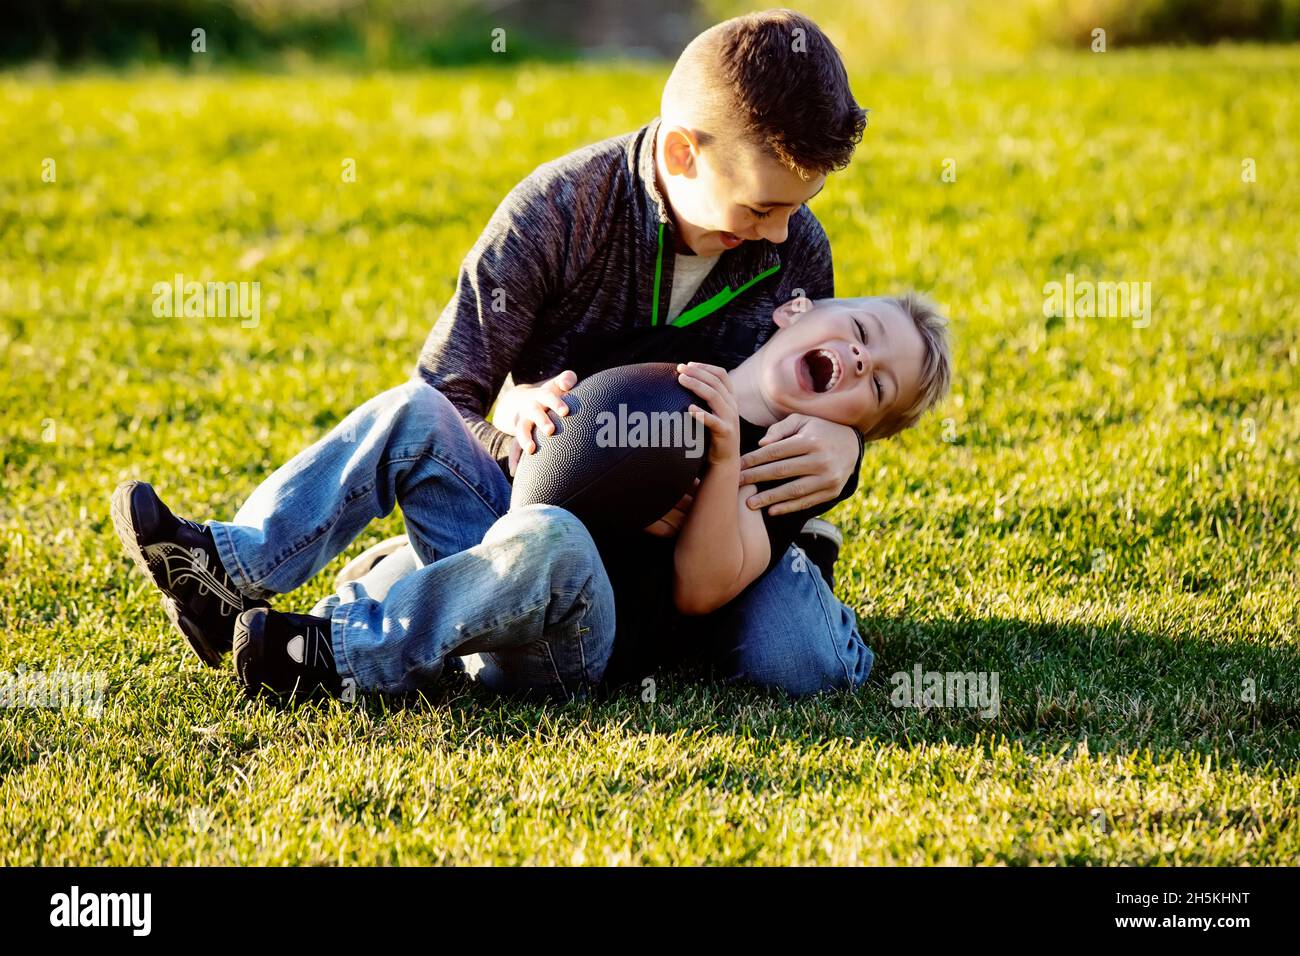 Two brothers roughhousing on the grass with a football; St. Albert, Alberta, Canada Stock Photo